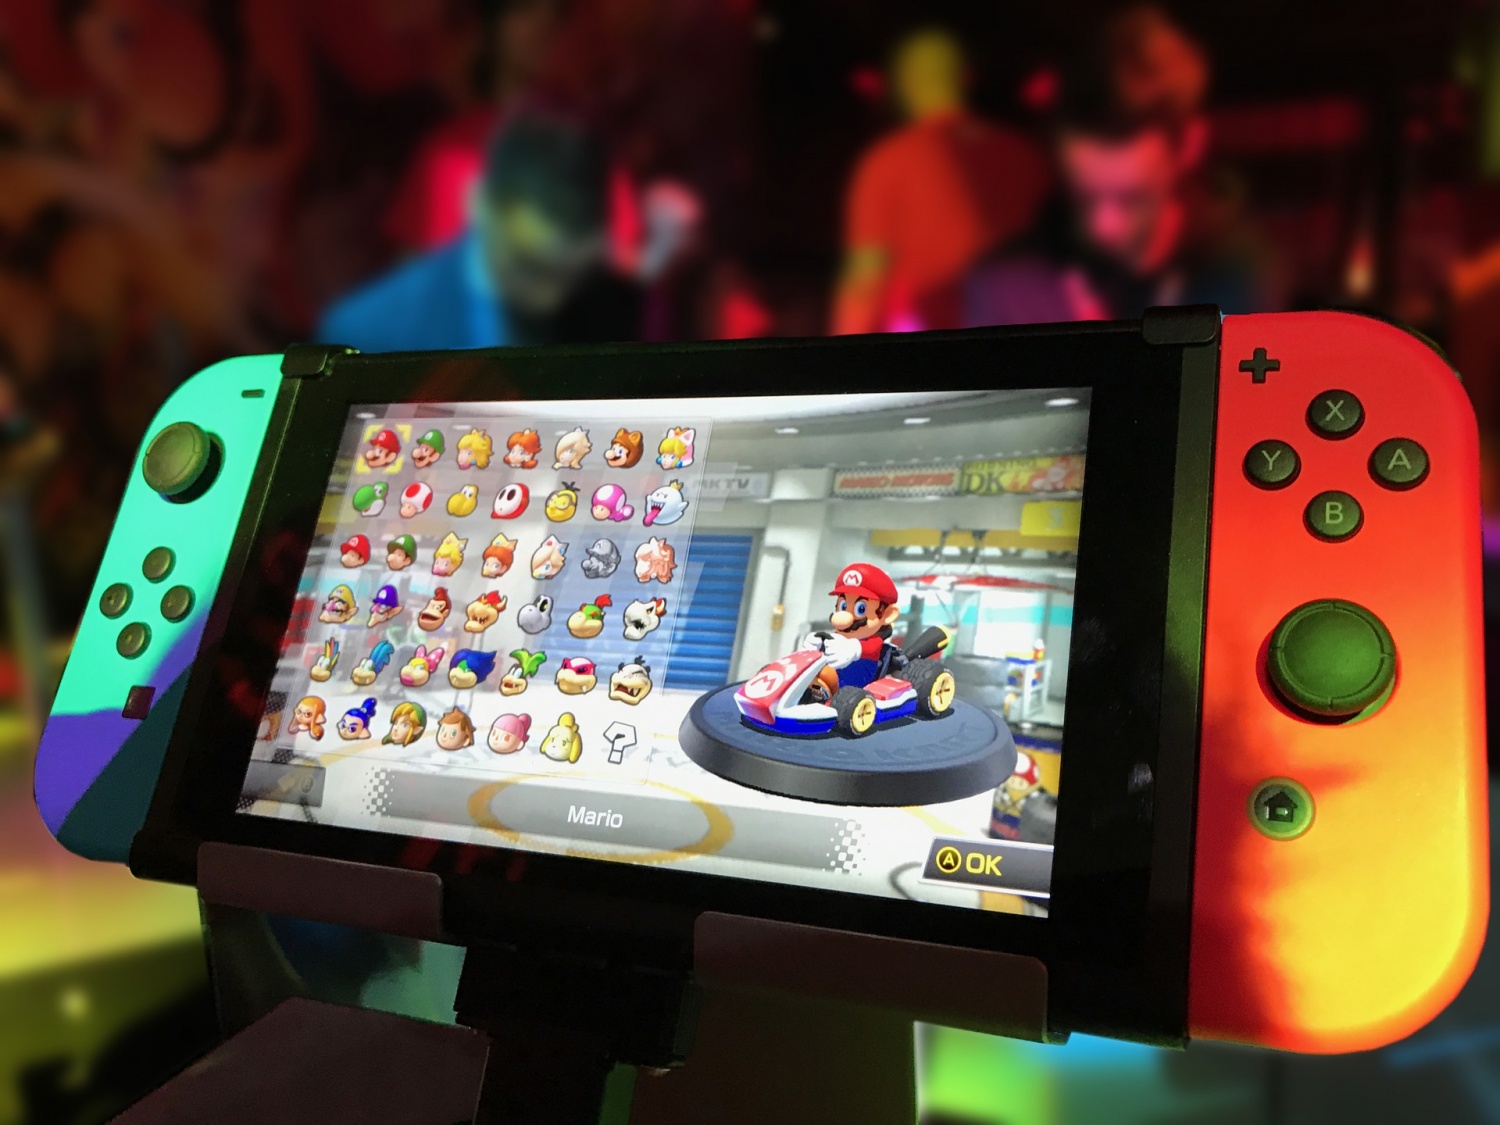 Buying a Switch this year? 5 distinctive accessories and games to grab.